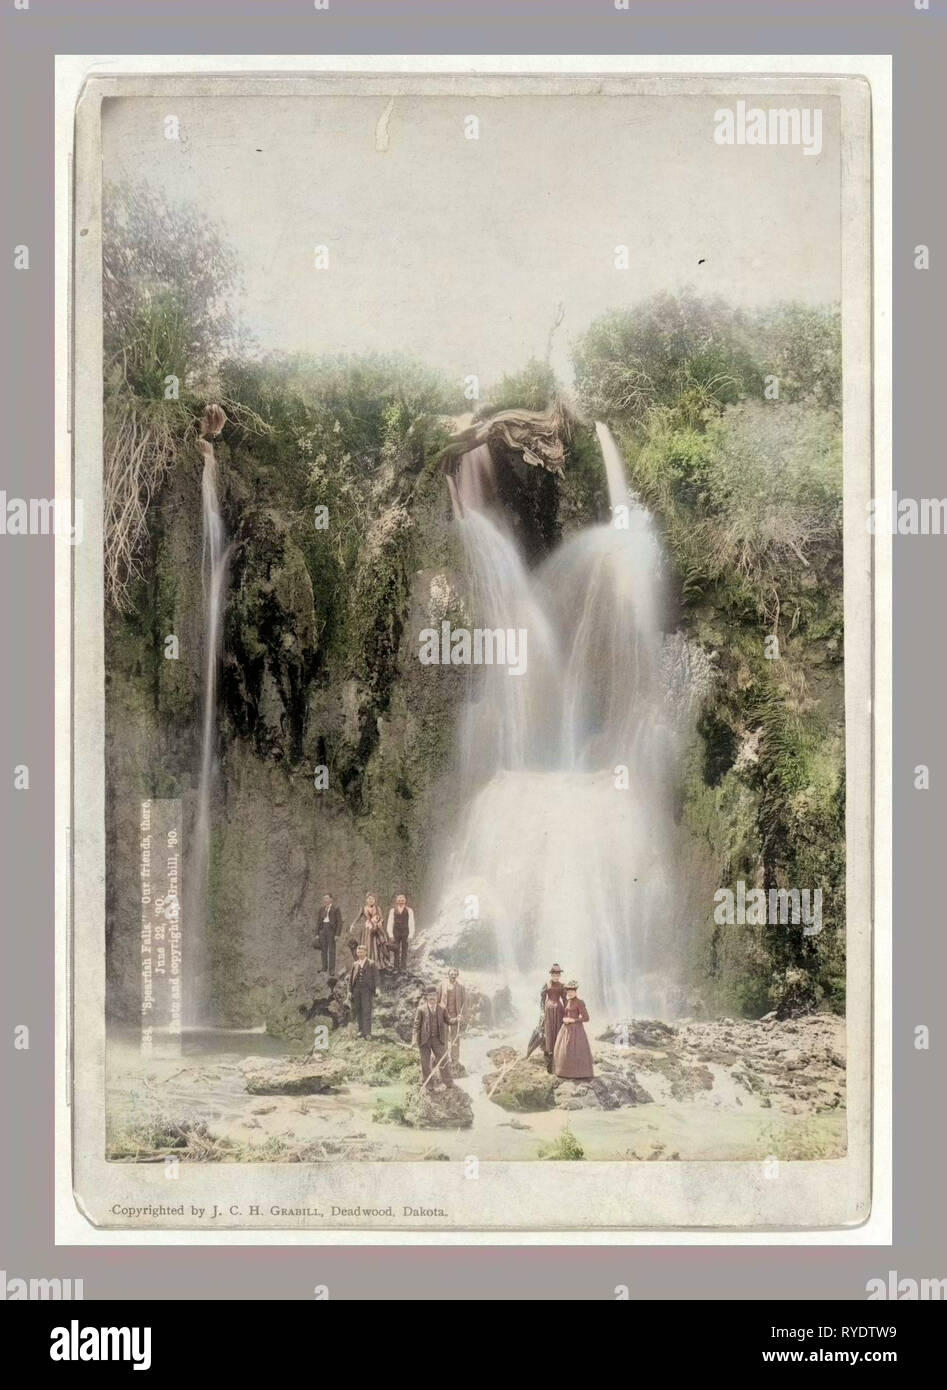 Spearfish Falls. Our Friends, There, June 22, 1890 Stock Photo